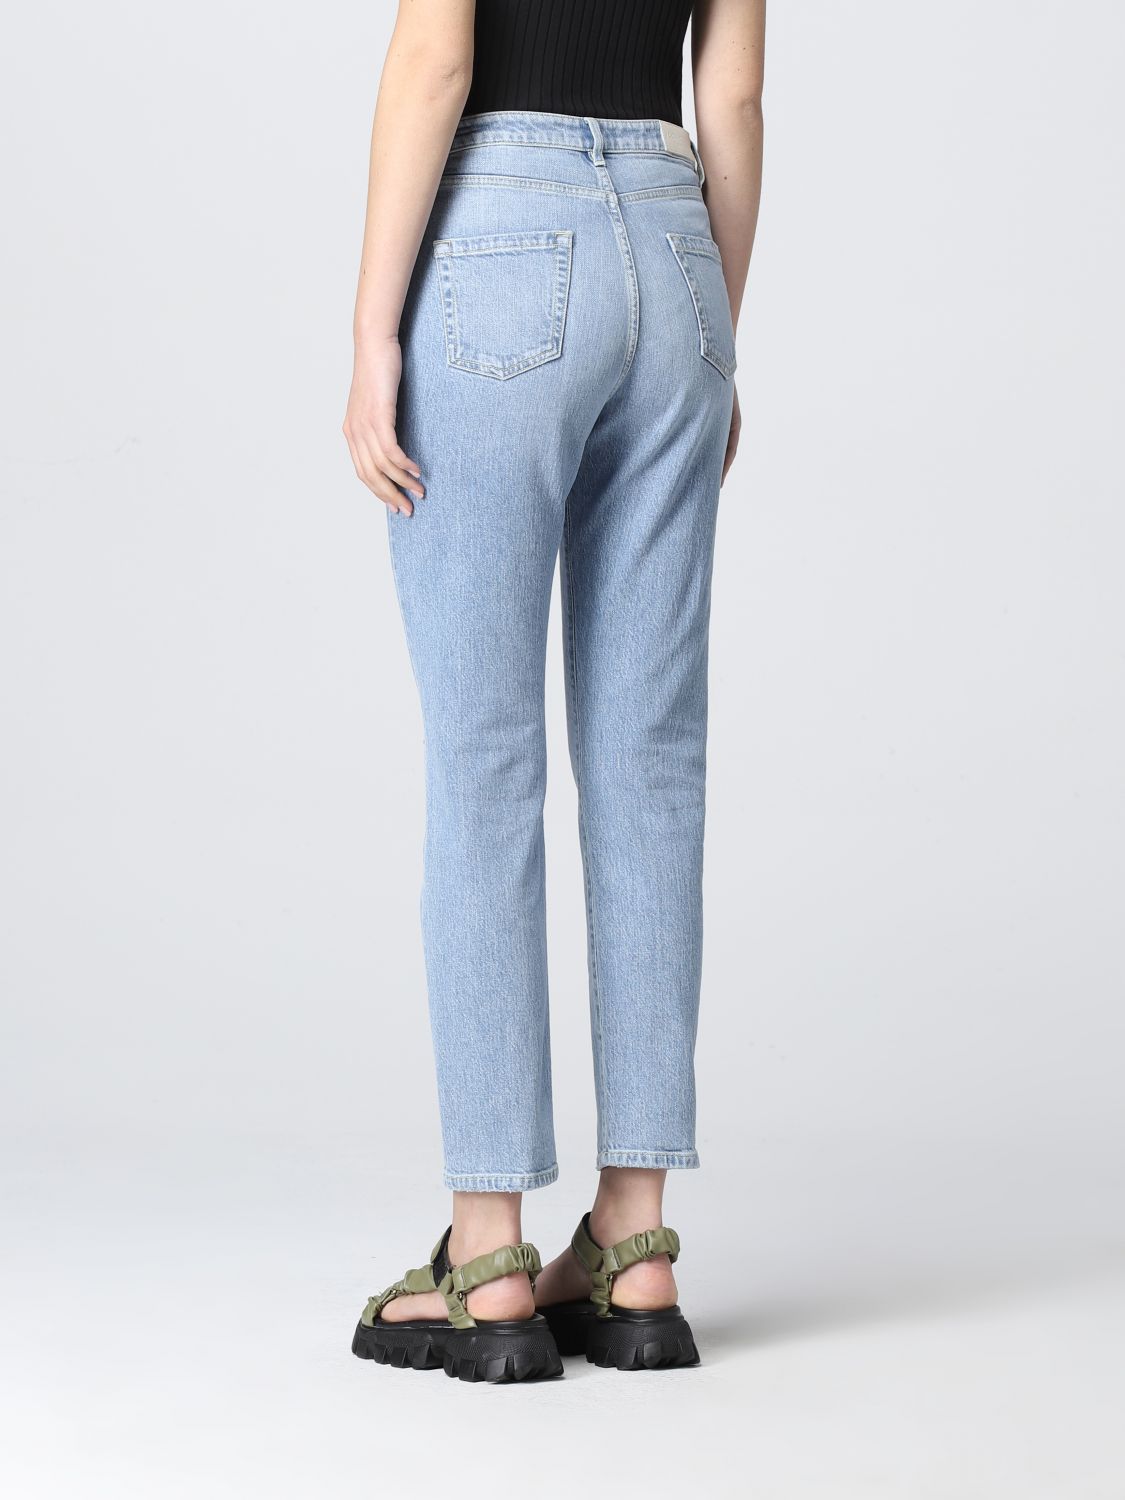 Jeans Icon Denim Los Angeles: Icon Denim Los Angeles jeans in ripped denim stone washed 2